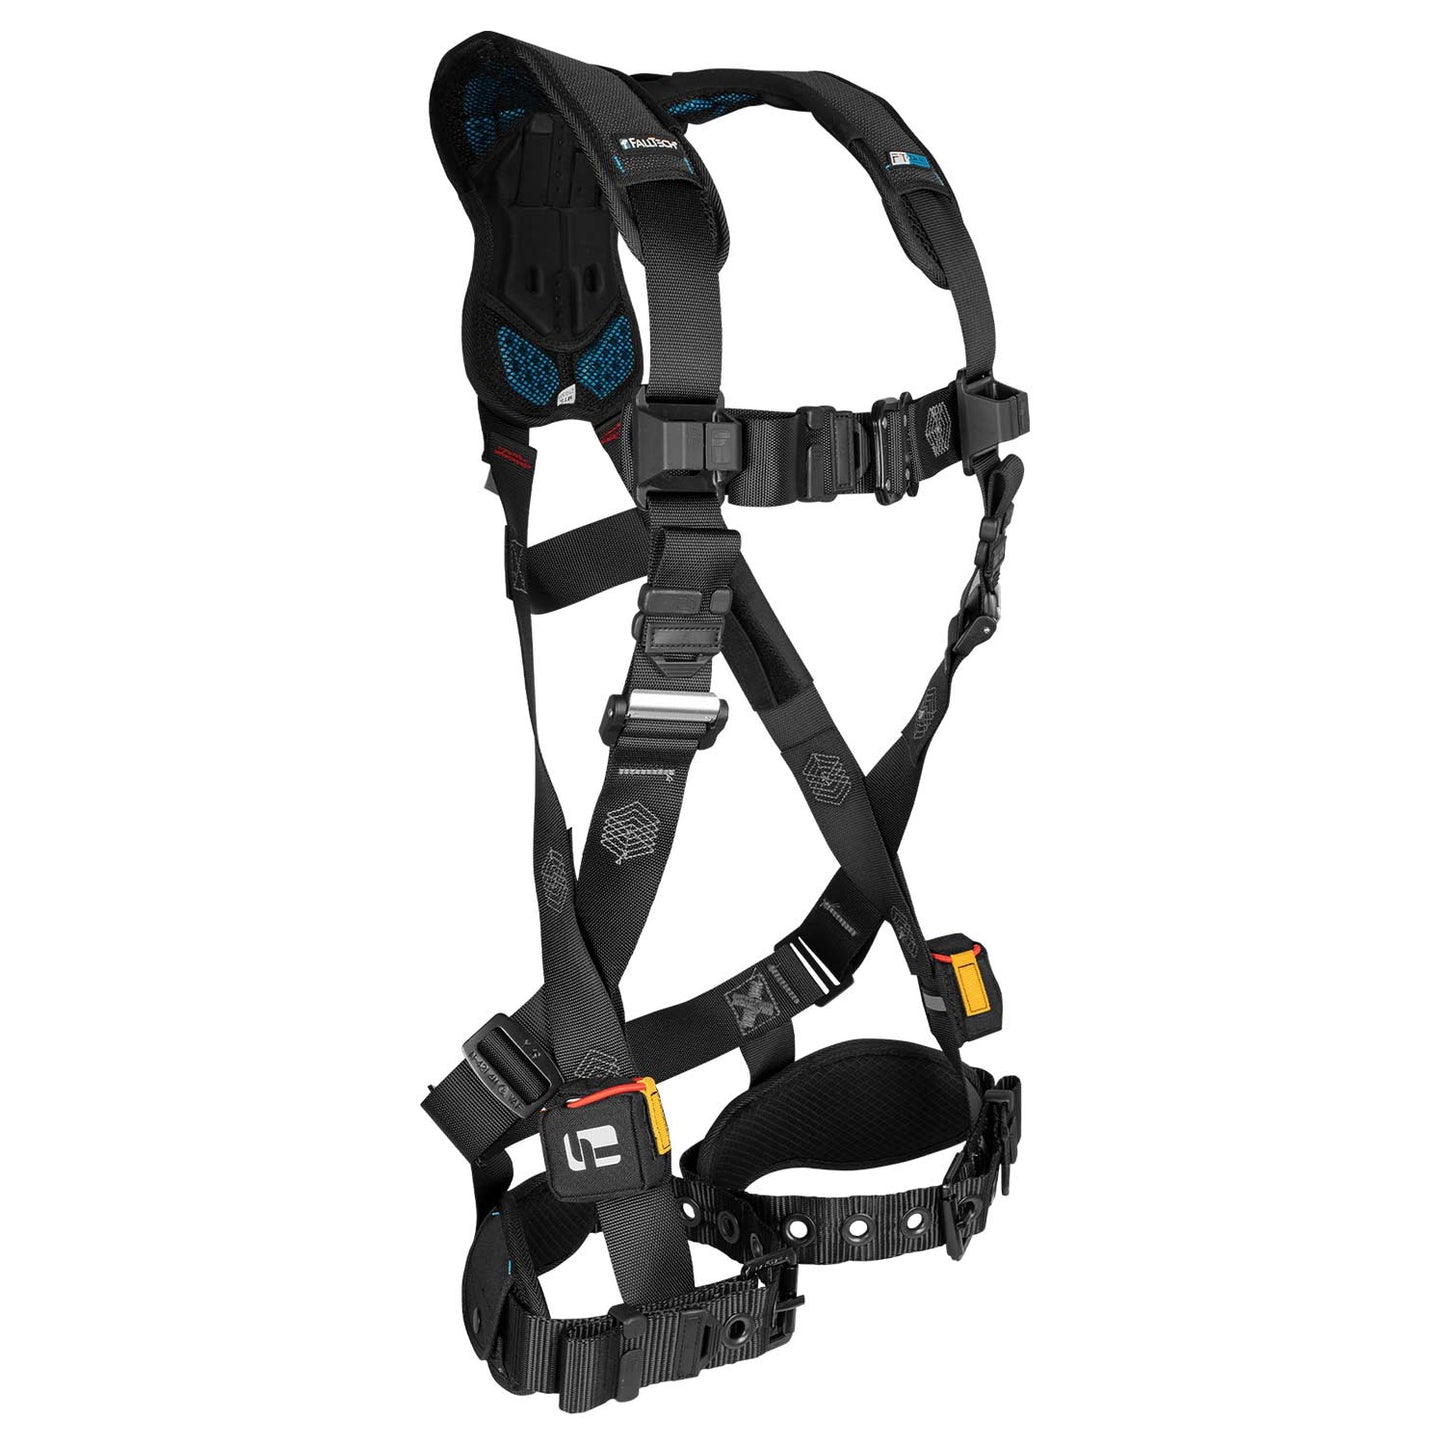 FallTech FT-One Fit Women's Safety Harness w/ Trauma Straps | Non-Belted | XL | 8129XL